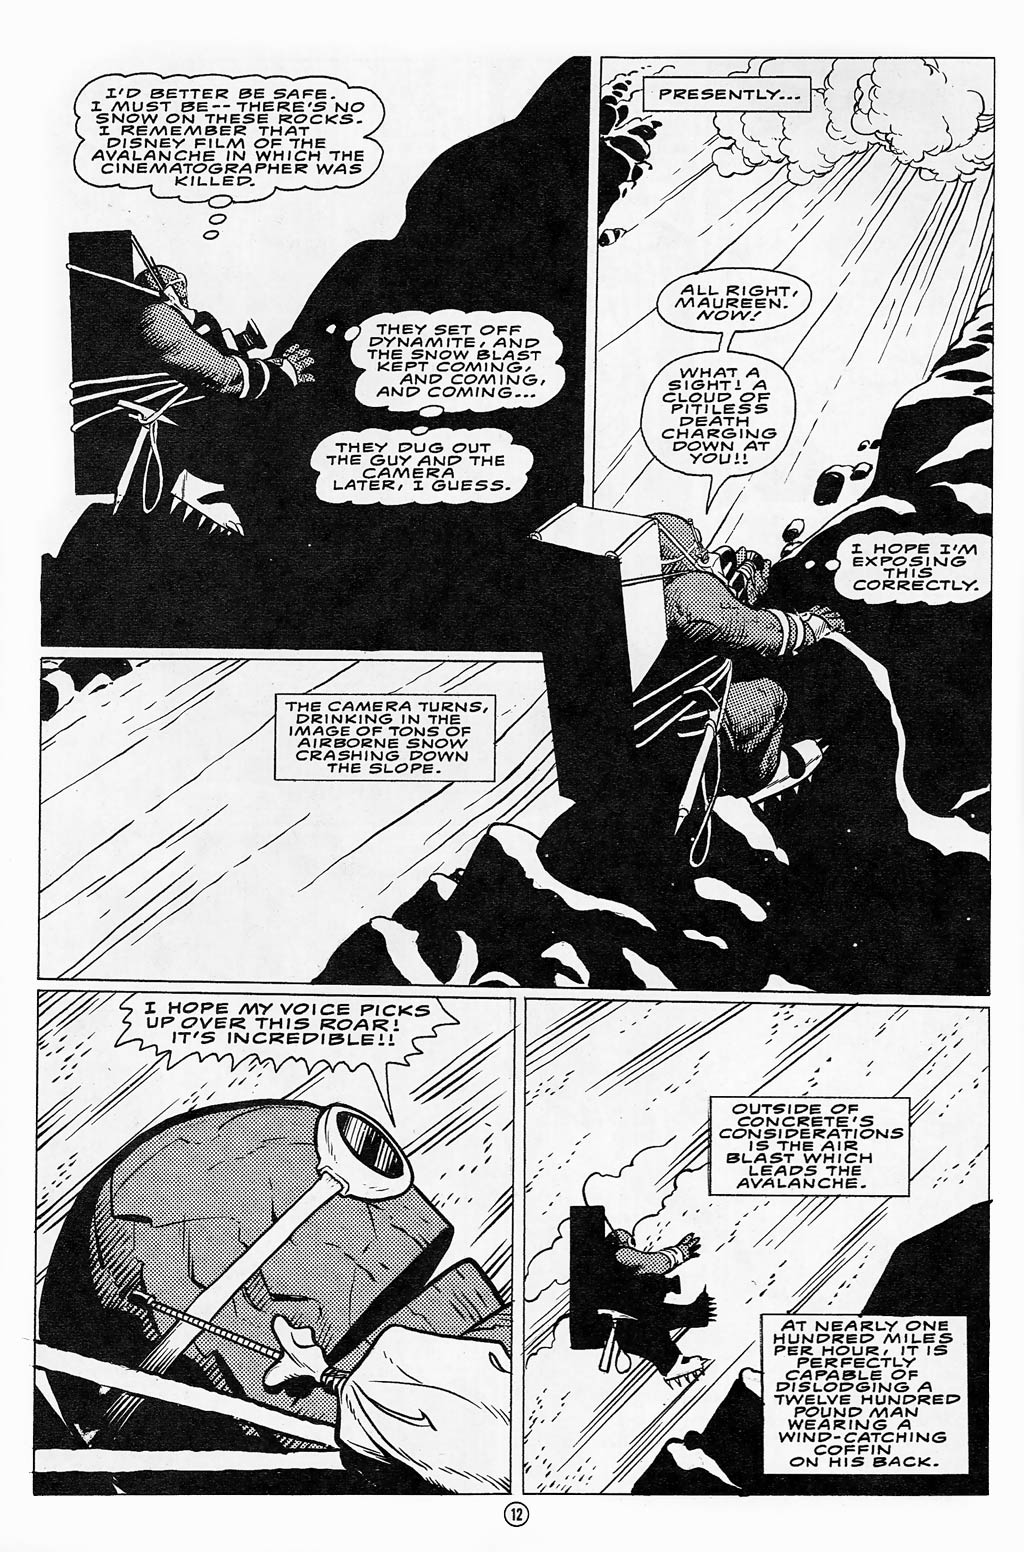 Concrete (1987) issue 9 - Page 14